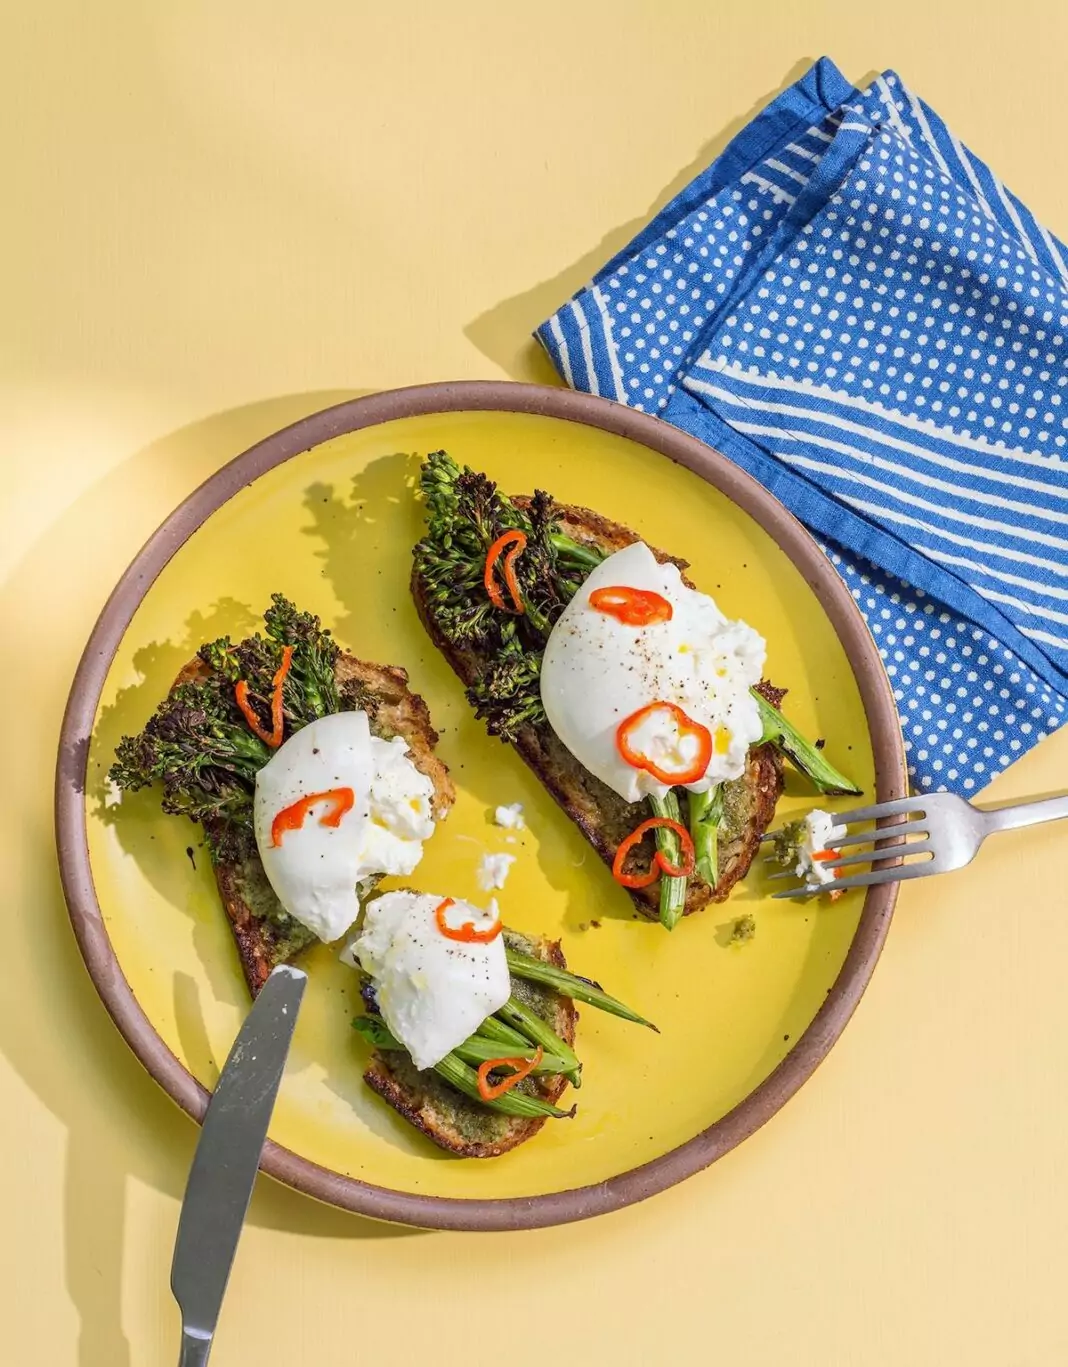 Yellow plate with two pieces of toast. On top of the toast is burrata cheese and some charred pieces of Broccolini sprinkled with sliced red pepper.